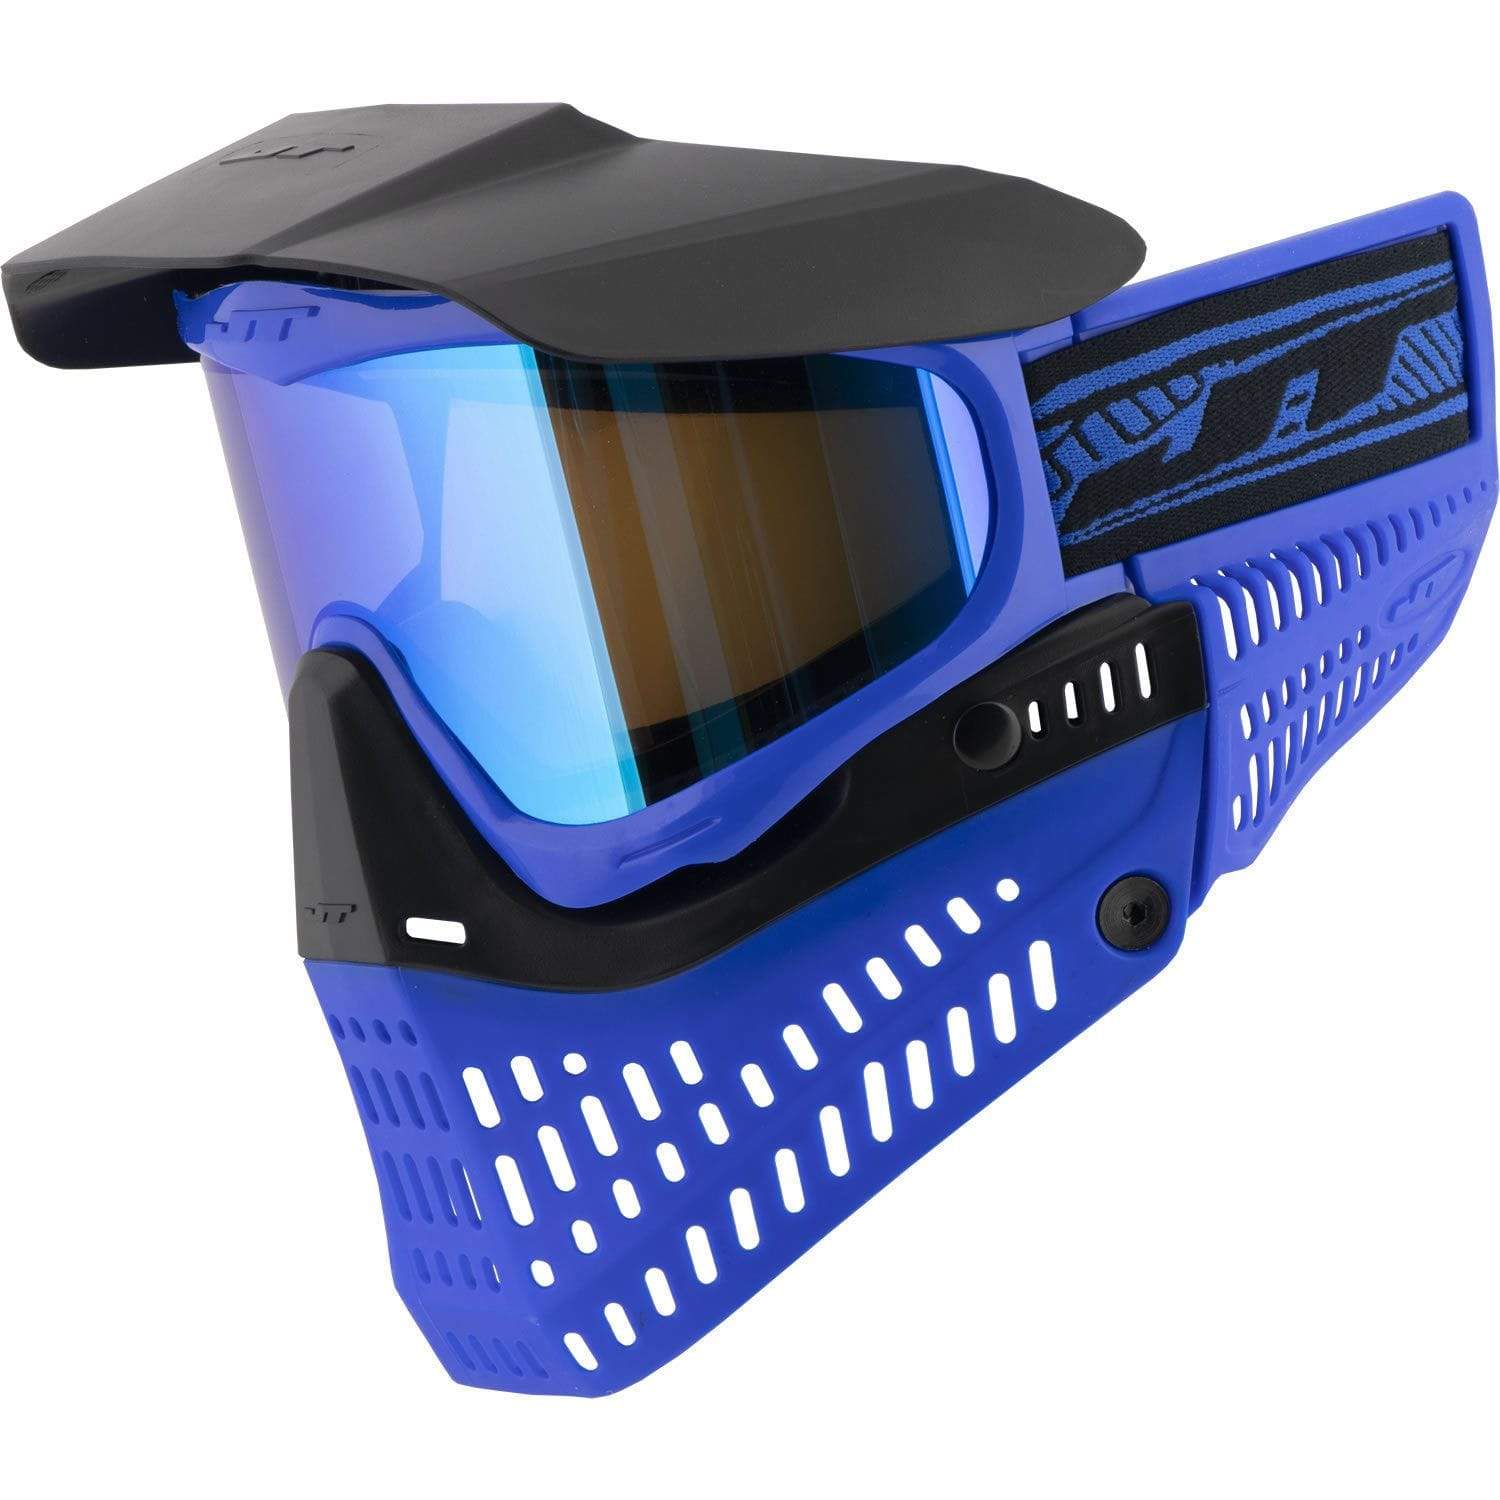  Sky 2.0 Prizm Thermal Lens - Eminent Paintball And Airsoft